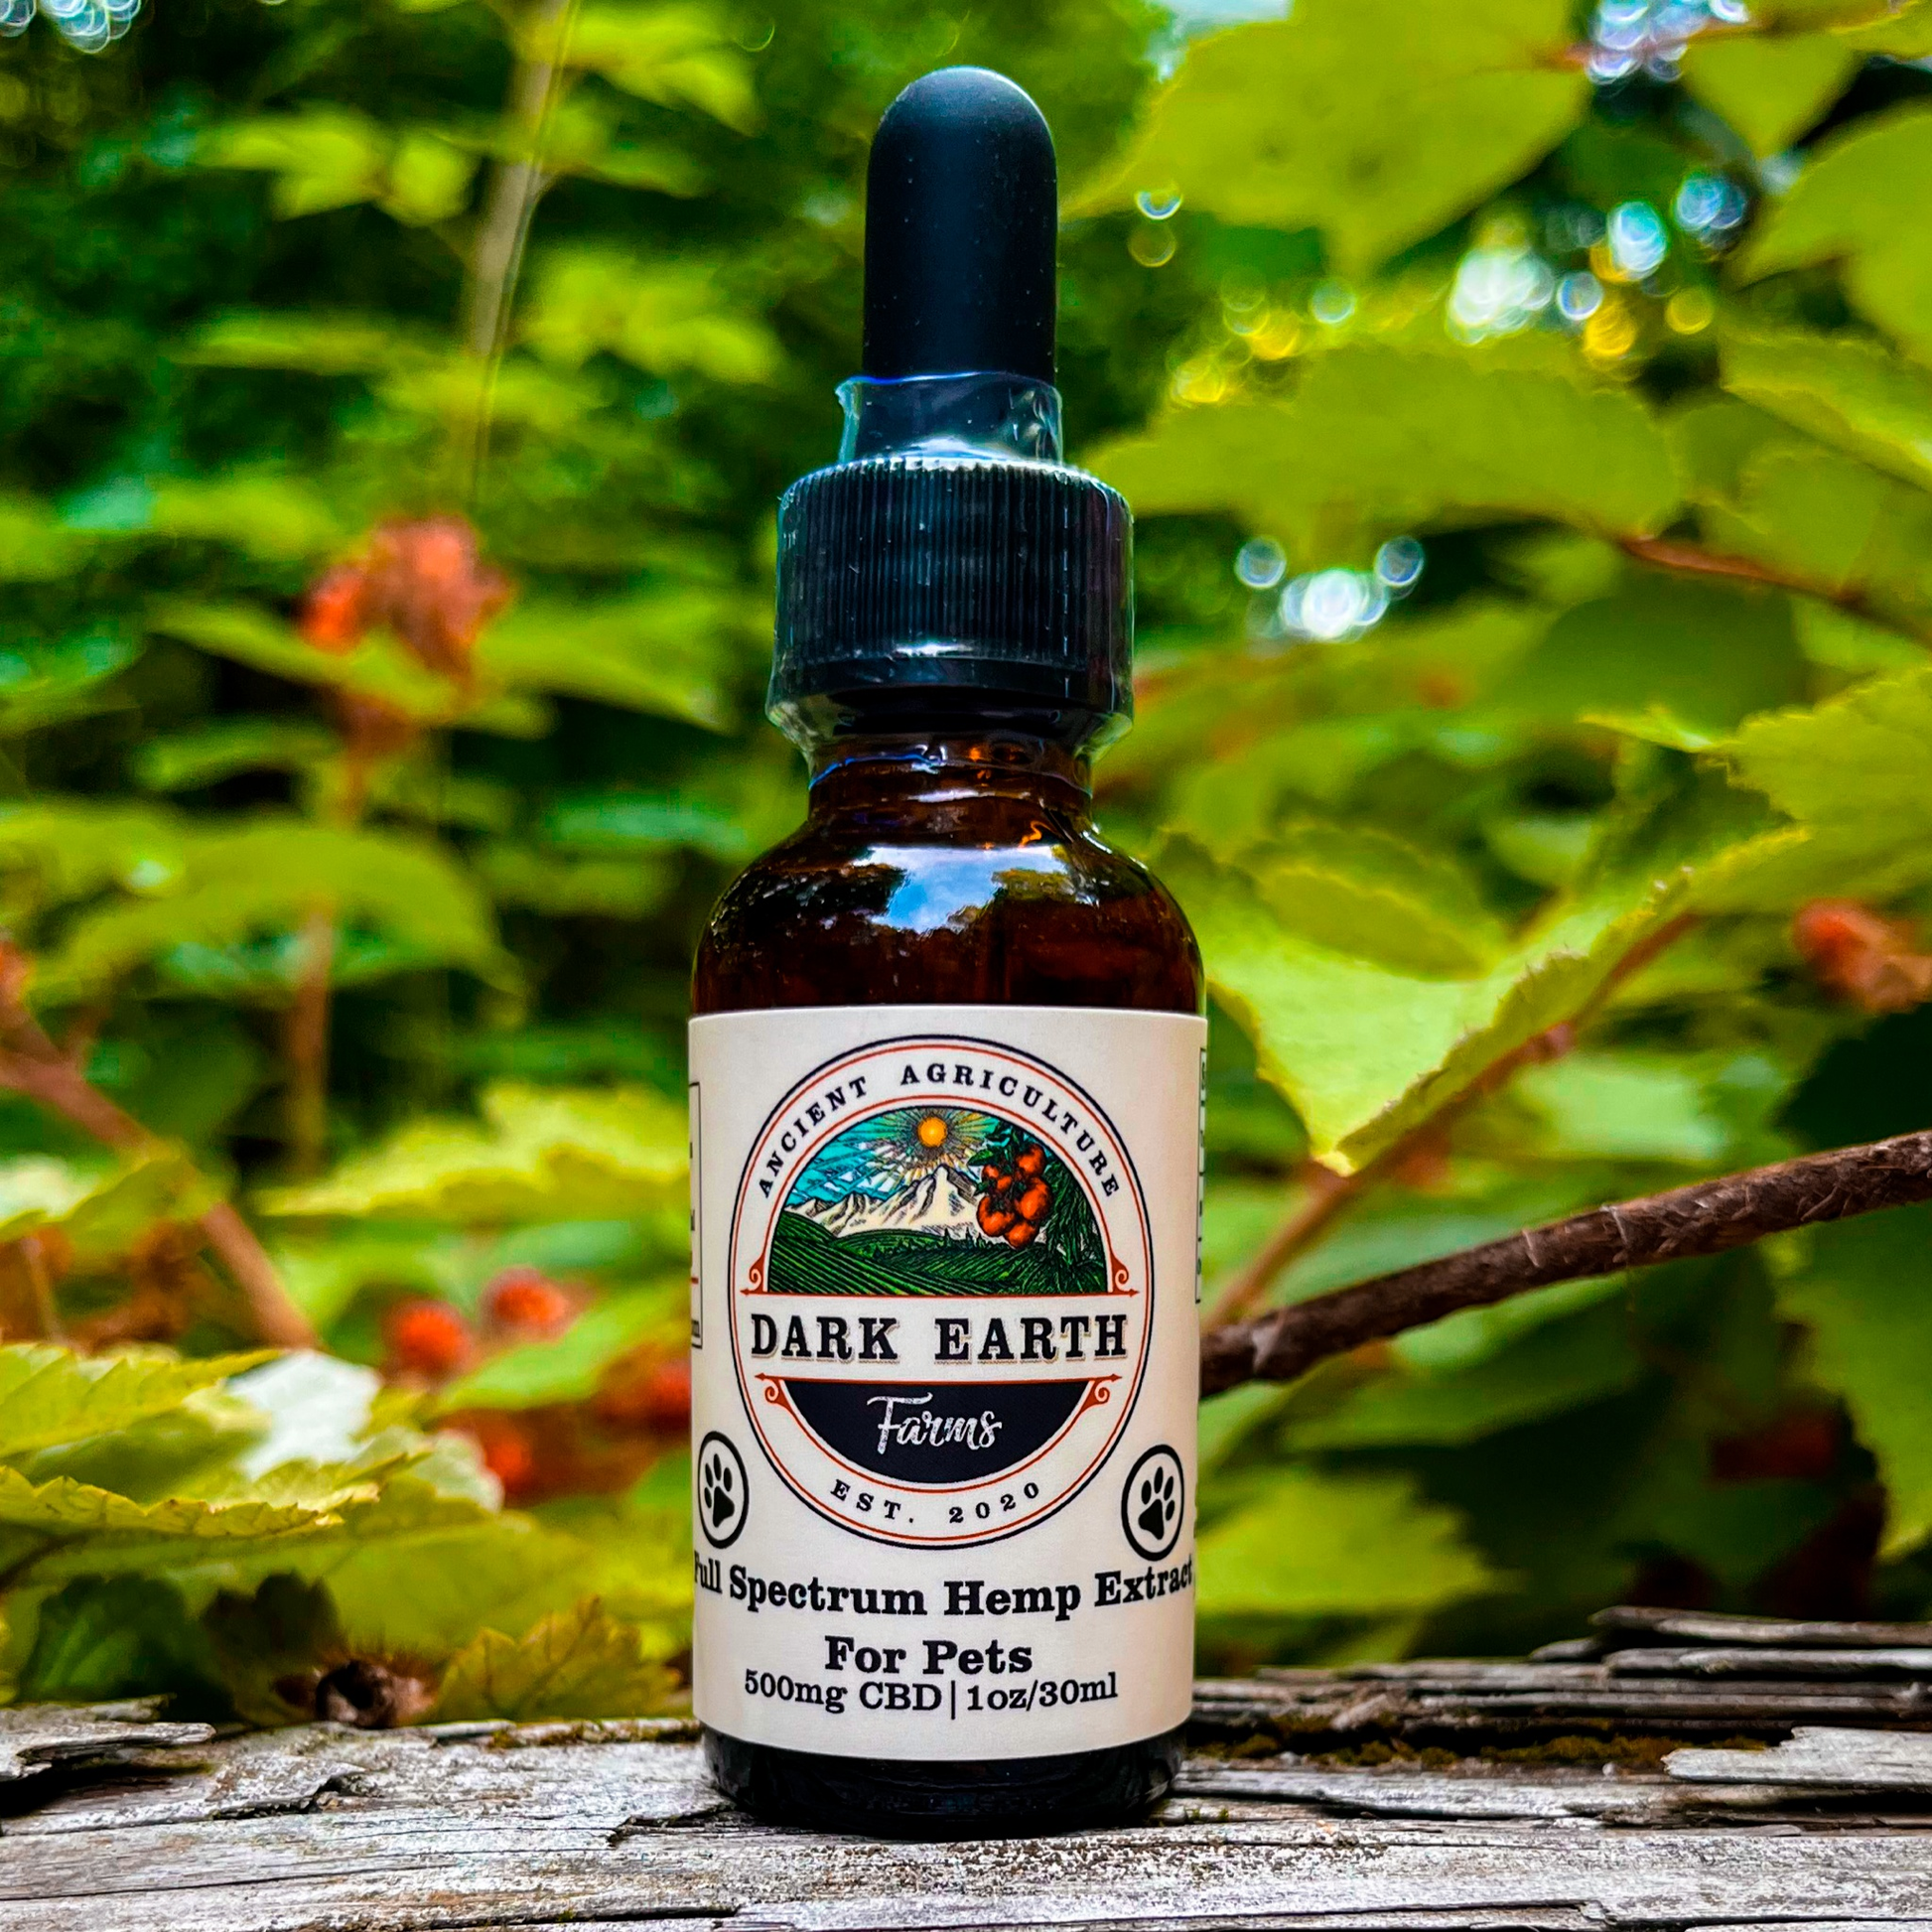 An image of a small bottle labeled Dark Earth Farms Full Spectrum Hemp Extract for Pets, featuring a green and yellow label with the brand name and product information. The bottle contains 500mg of CBD oil with terpenes and cannabinoids, specifically designed for pets to help alleviate pain, anxiety, and improve sleep. The bottle is placed on a wooden surface, surrounded by hemp leaves and a small dropper next to it, ready for use.